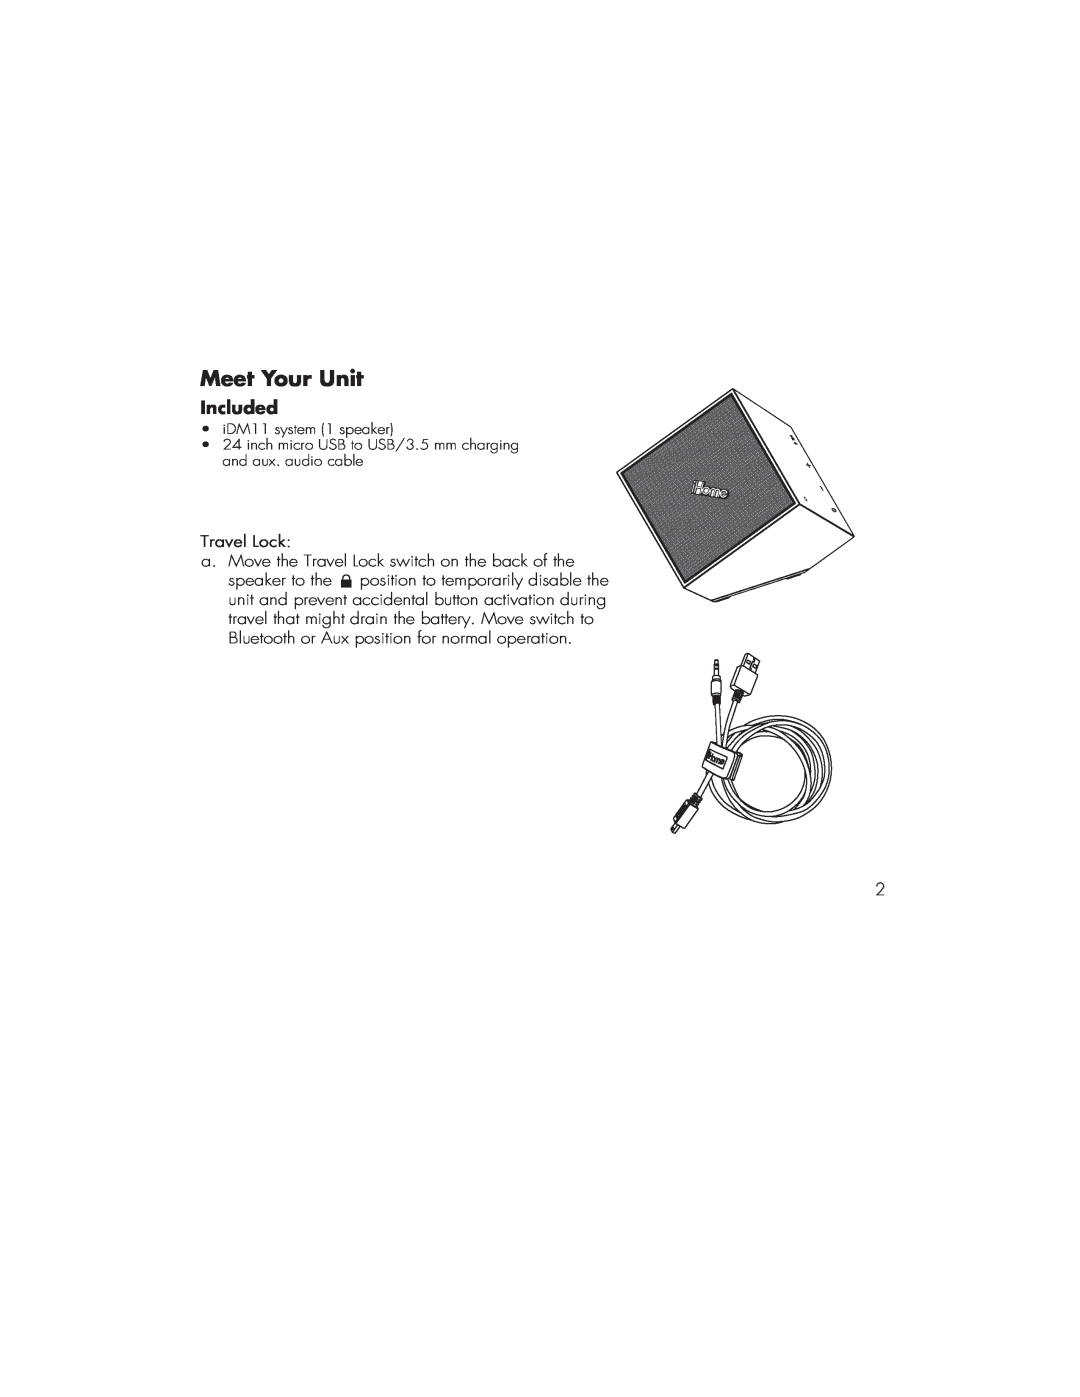 iHome iDM11 manual Meet Your Unit, Included, Travel Lock 